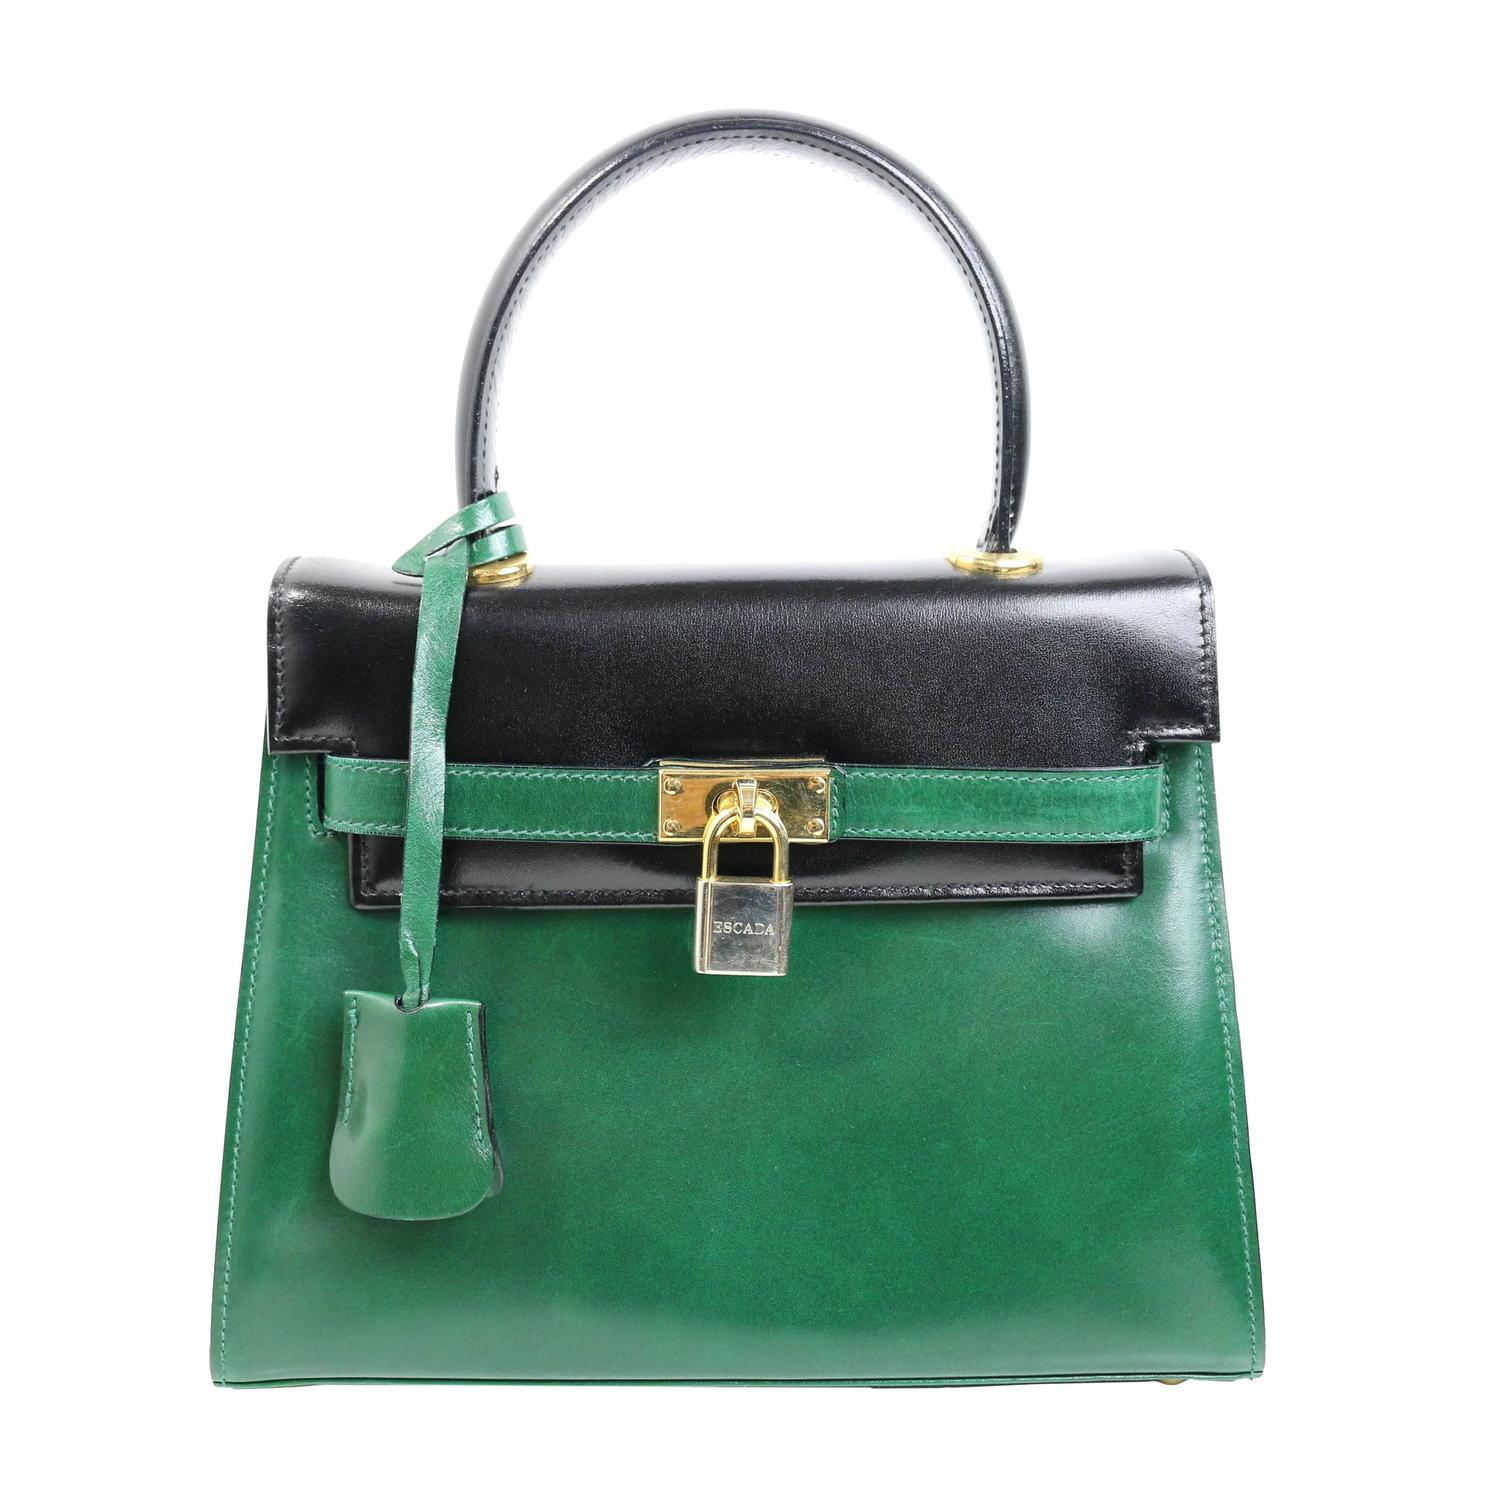 Escada Green and Black Patent Leather Handbag For Sale at 1stdibs